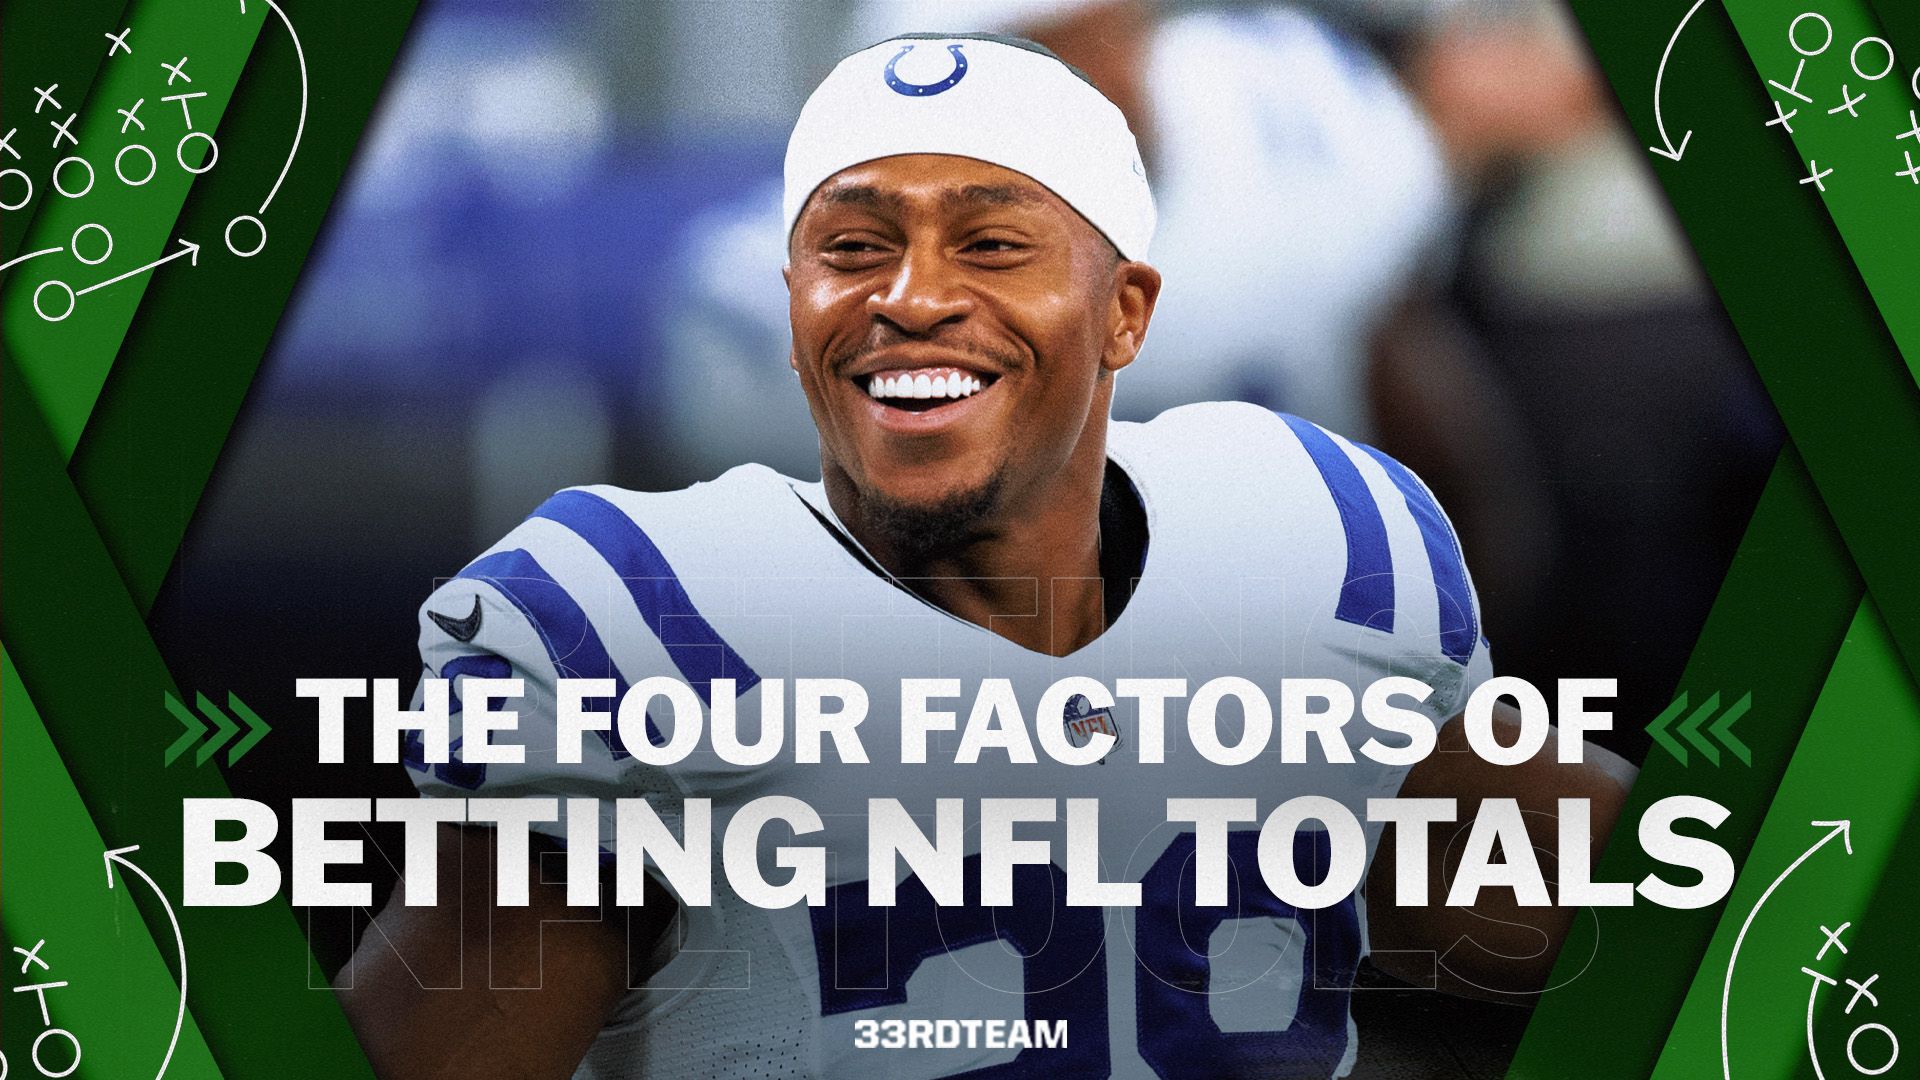 The Four Factors of Betting NFL Totals